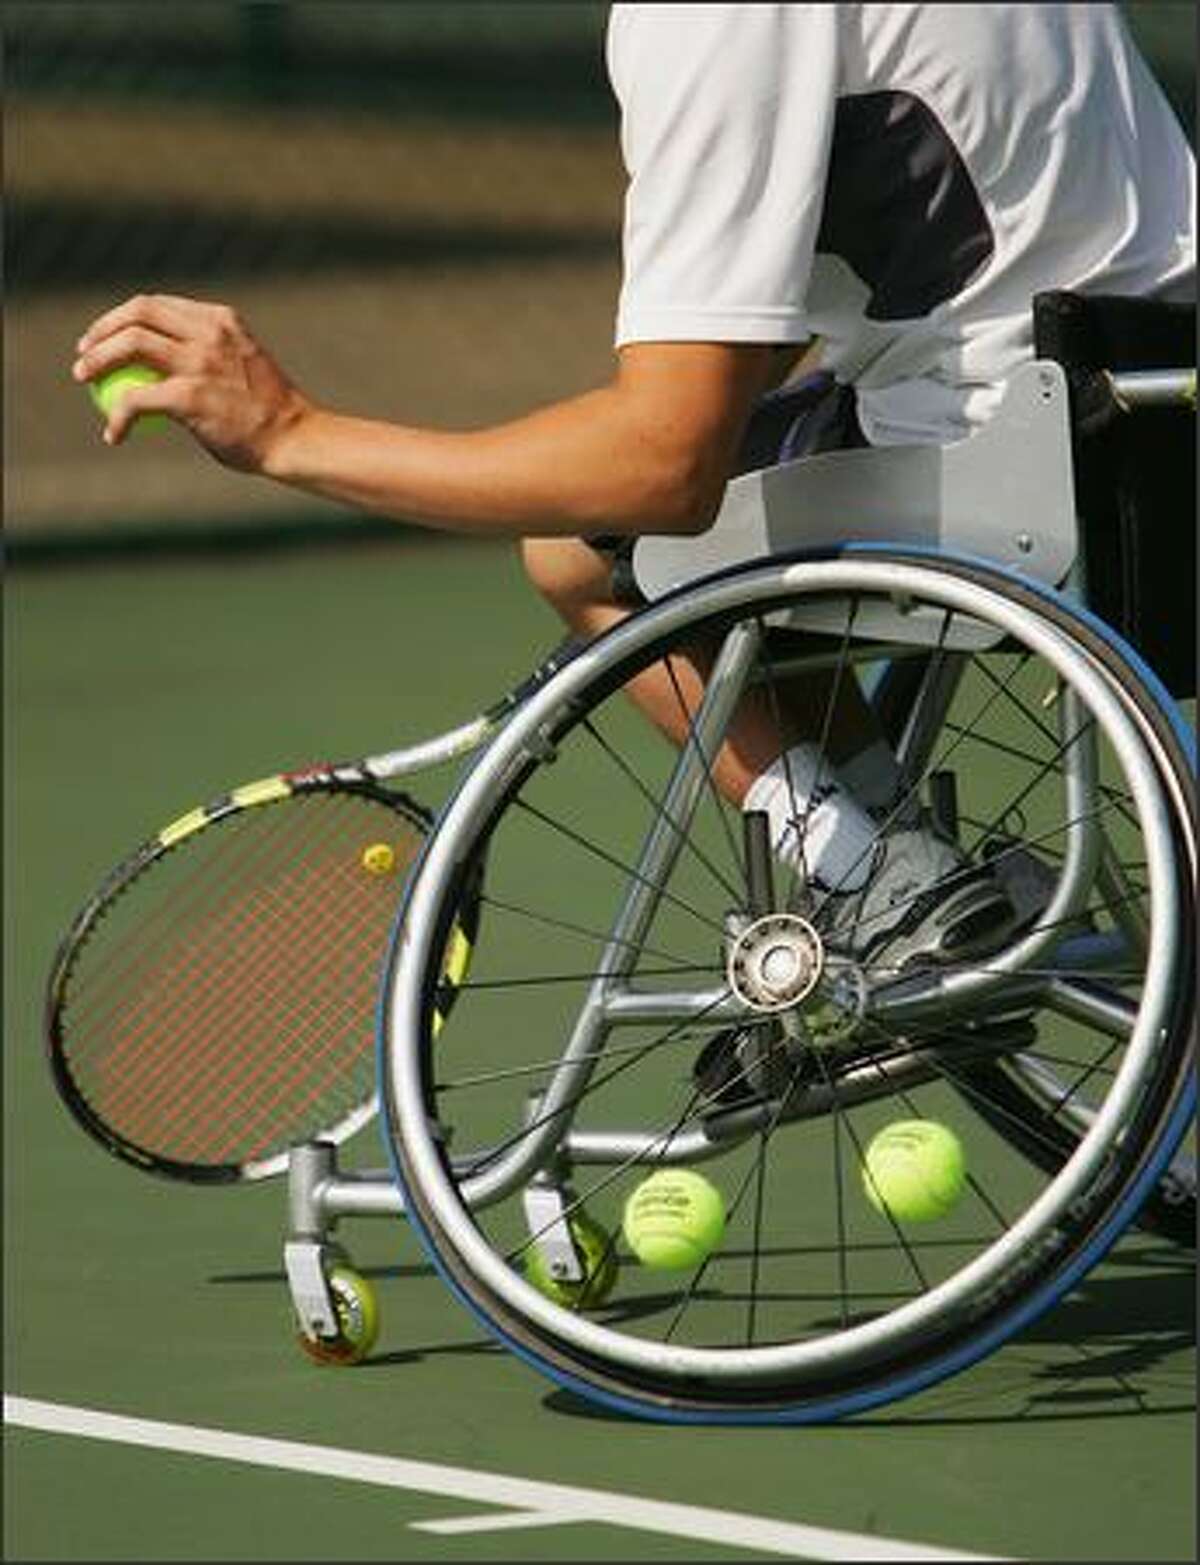 A player serves during the British Open Wheelchair Championships at the Nottingham Tennis Centre on July 24, 2007 in Nottingham, England. Photo by Matthew Lewis/Getty Images